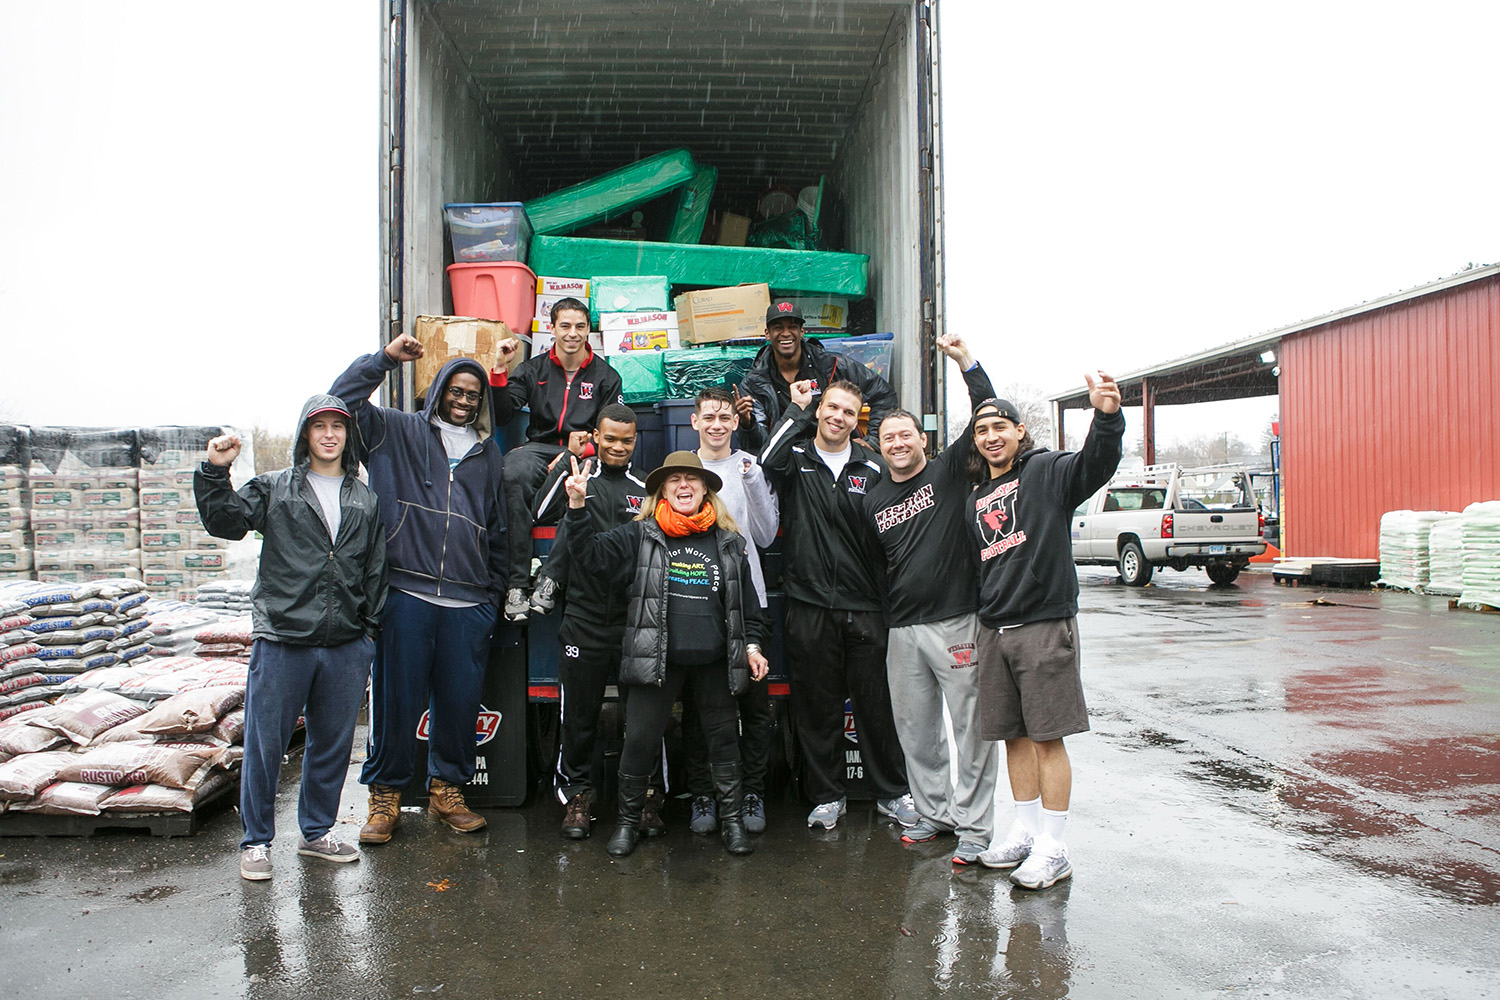 Members of the Wesleyan football team and coach Dan DiCenzo, second from right, celebrate their successful packing service for Artists for World Peace. Founder and executive director Wendy Black-Nasta P’07, center is shipping the equipment to a Tanzanian village where she and others will offer an eye clinic this summer. (Photo by Lucy Guiliano for Artists for World Peace)